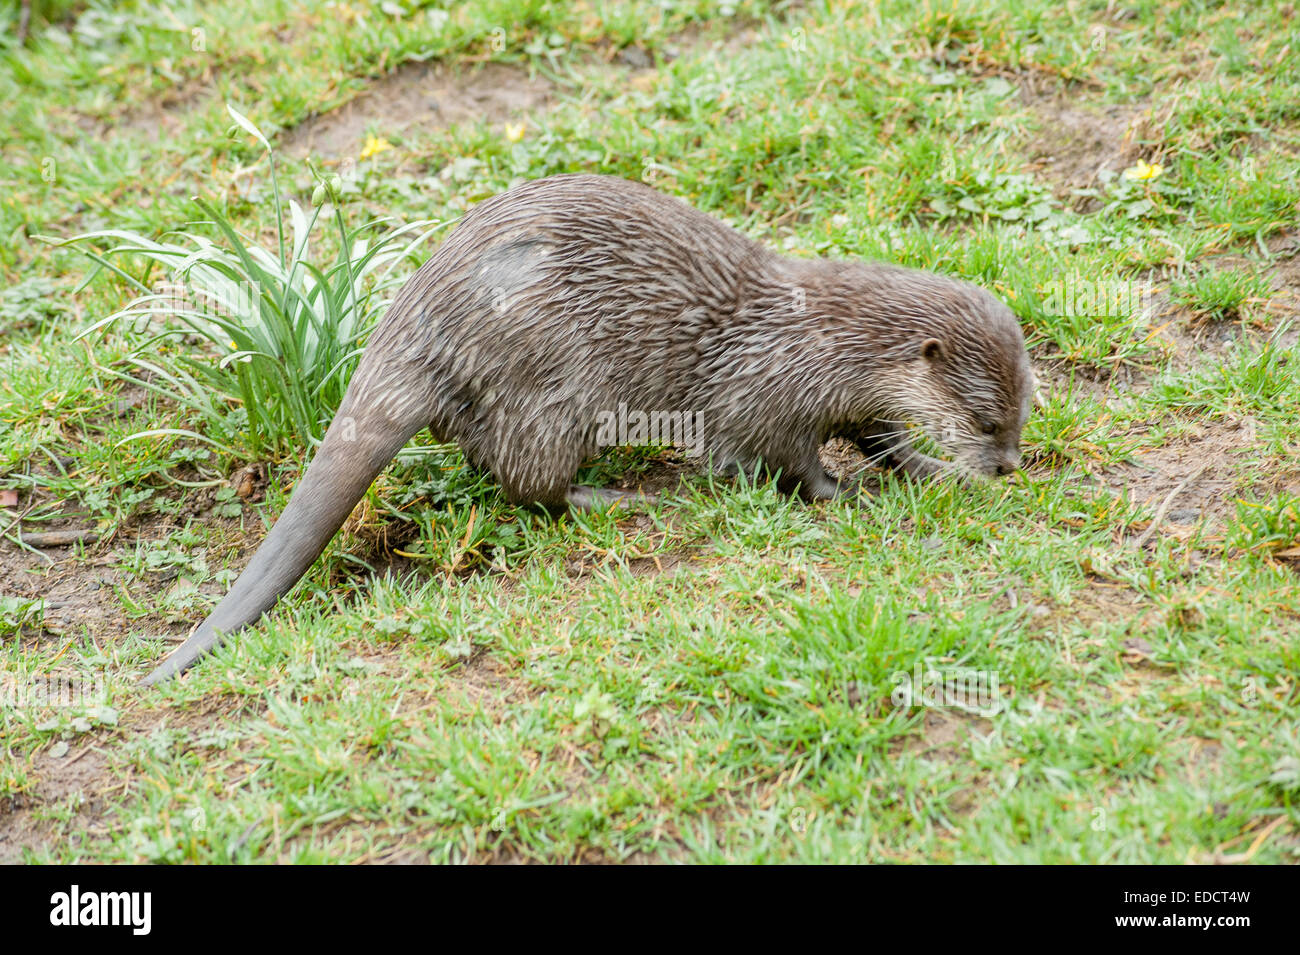 Otters are carnivorous mammals in the subfamily Lutrinae. The 13 extant otter species are all semiaquatic, aquatic or marine, with diets based on fish Stock Photo